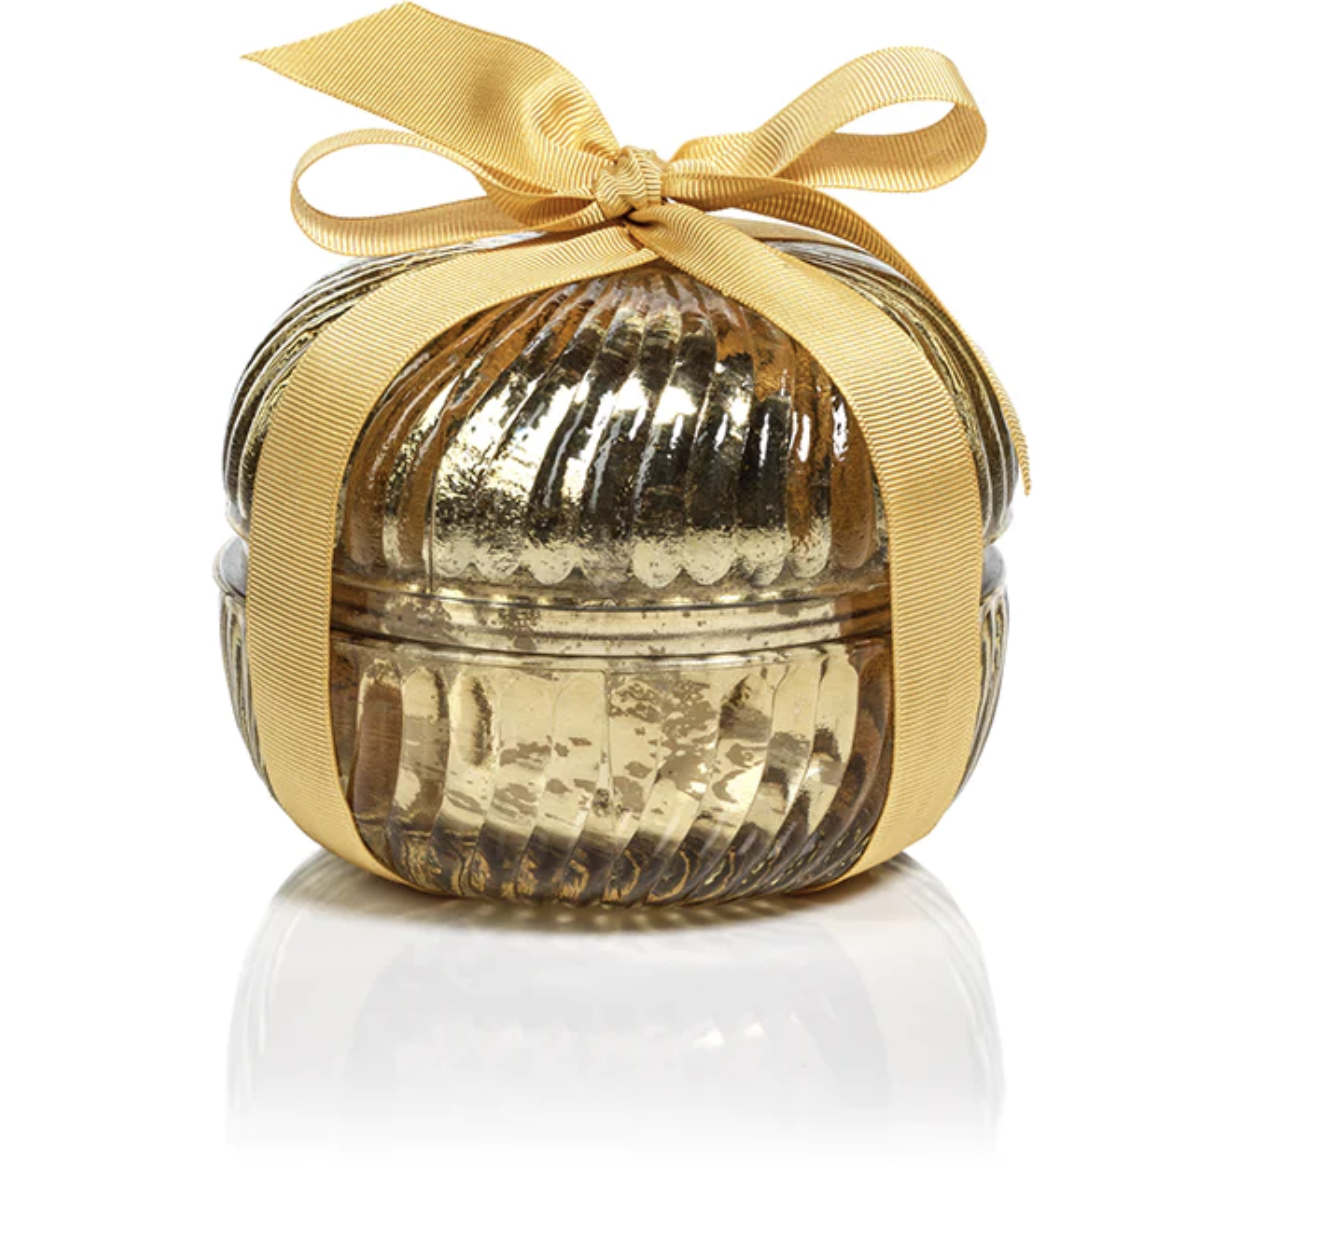 ZODAX FLUTED ROUND CANDLE JAR/GOLD-VENETIAN PROSECCO BELLINI